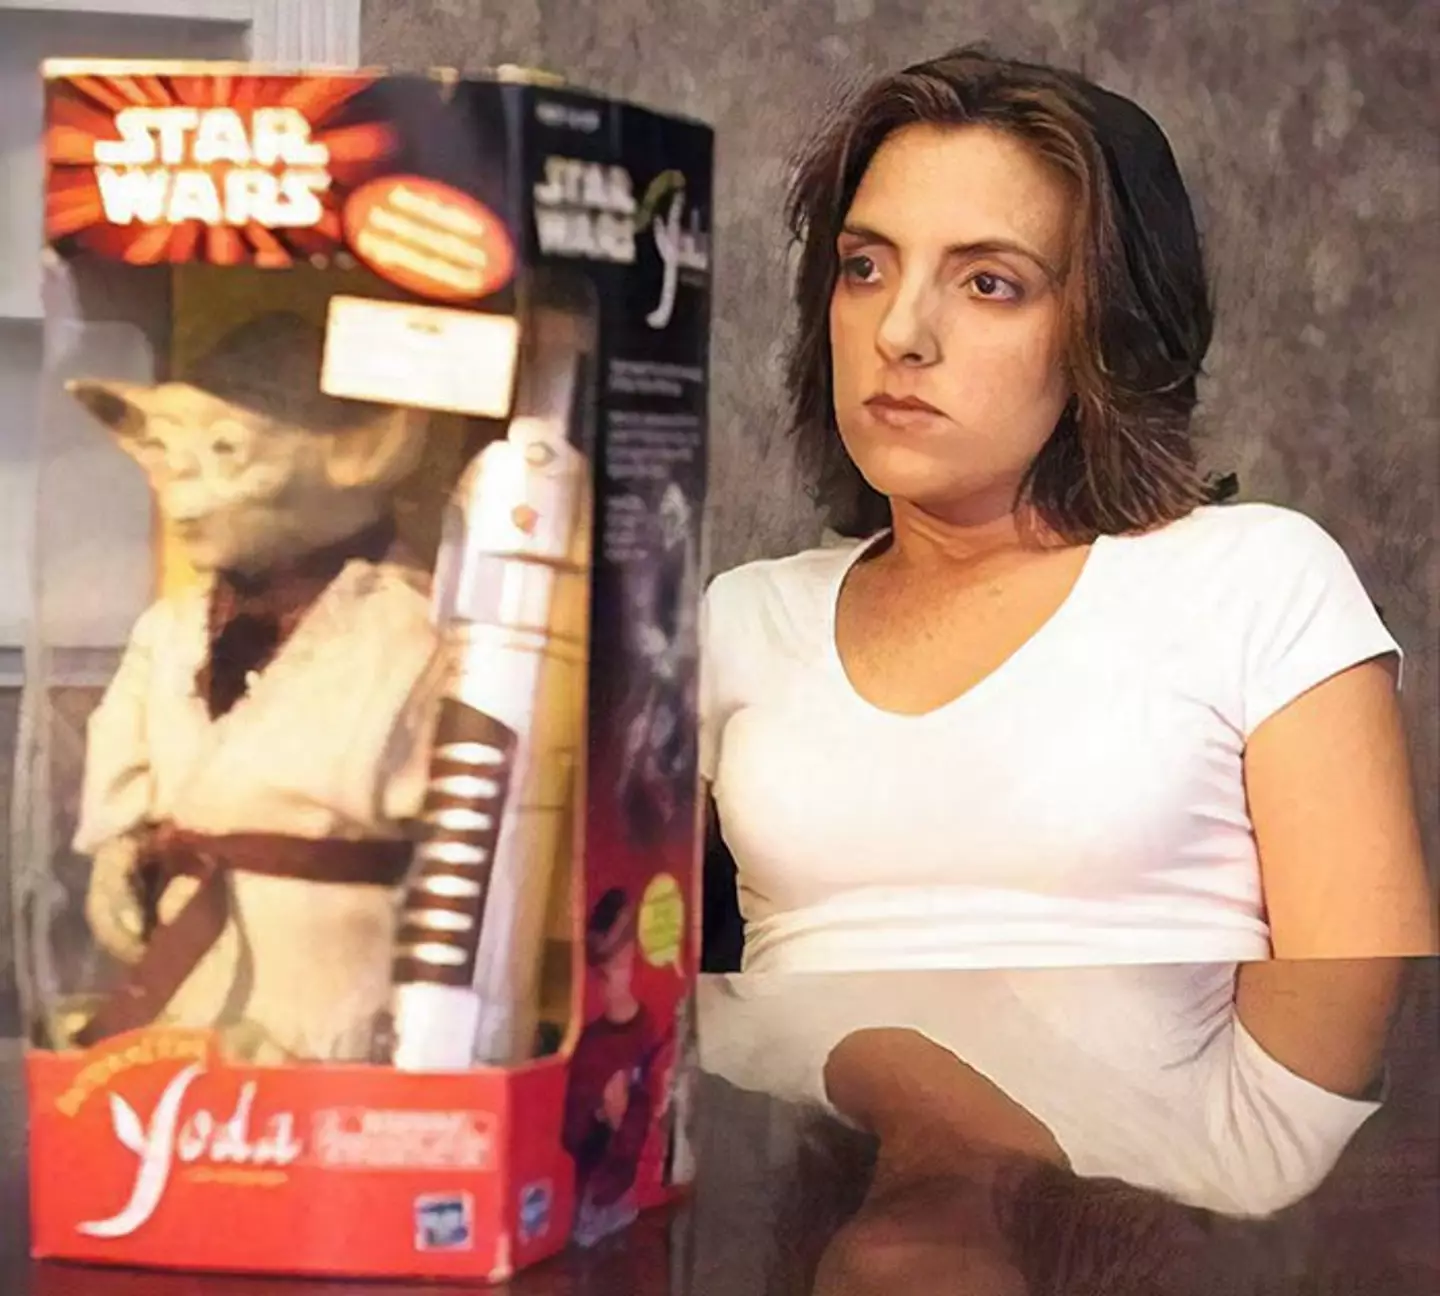 Jodee was not impressed with her toy Yoda.